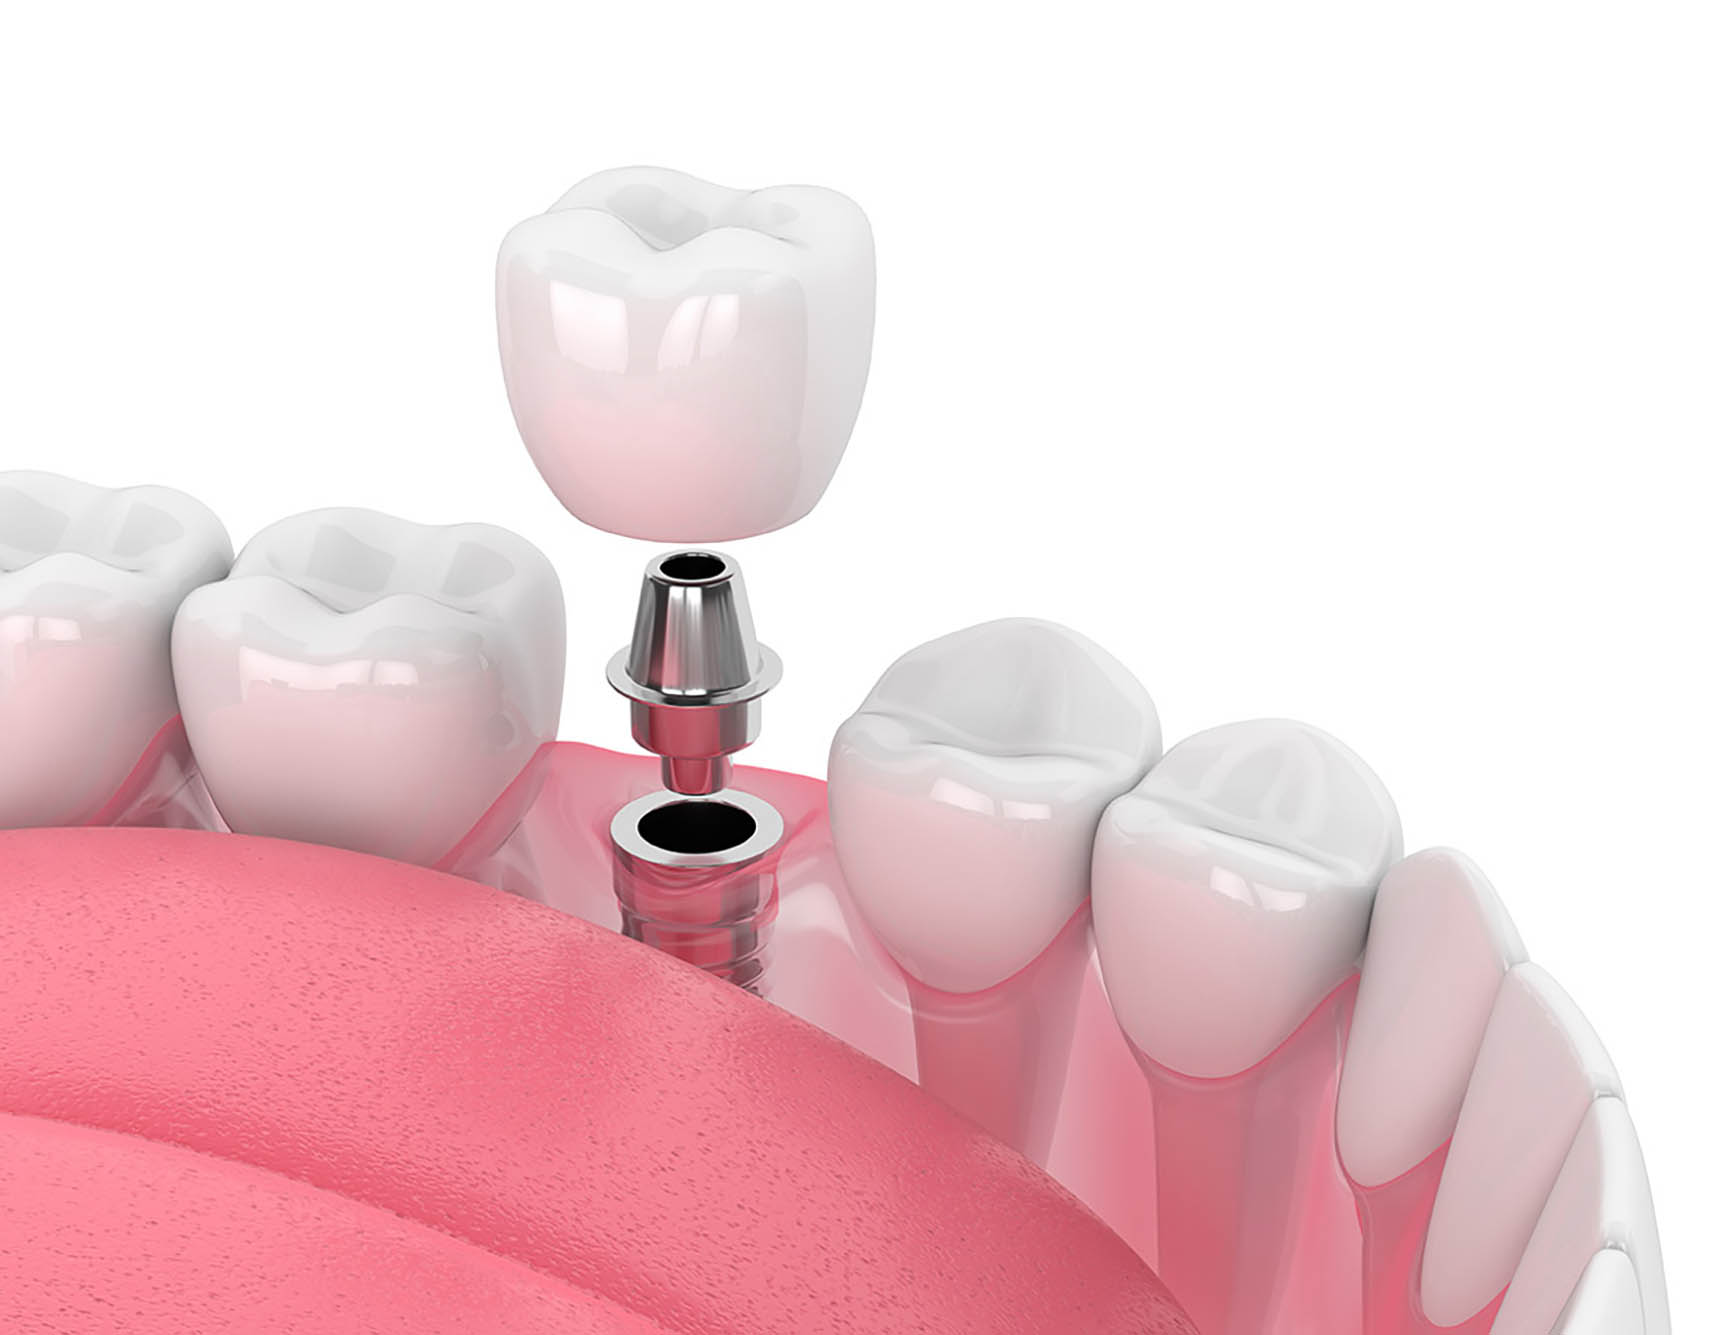 Referrals for Implants